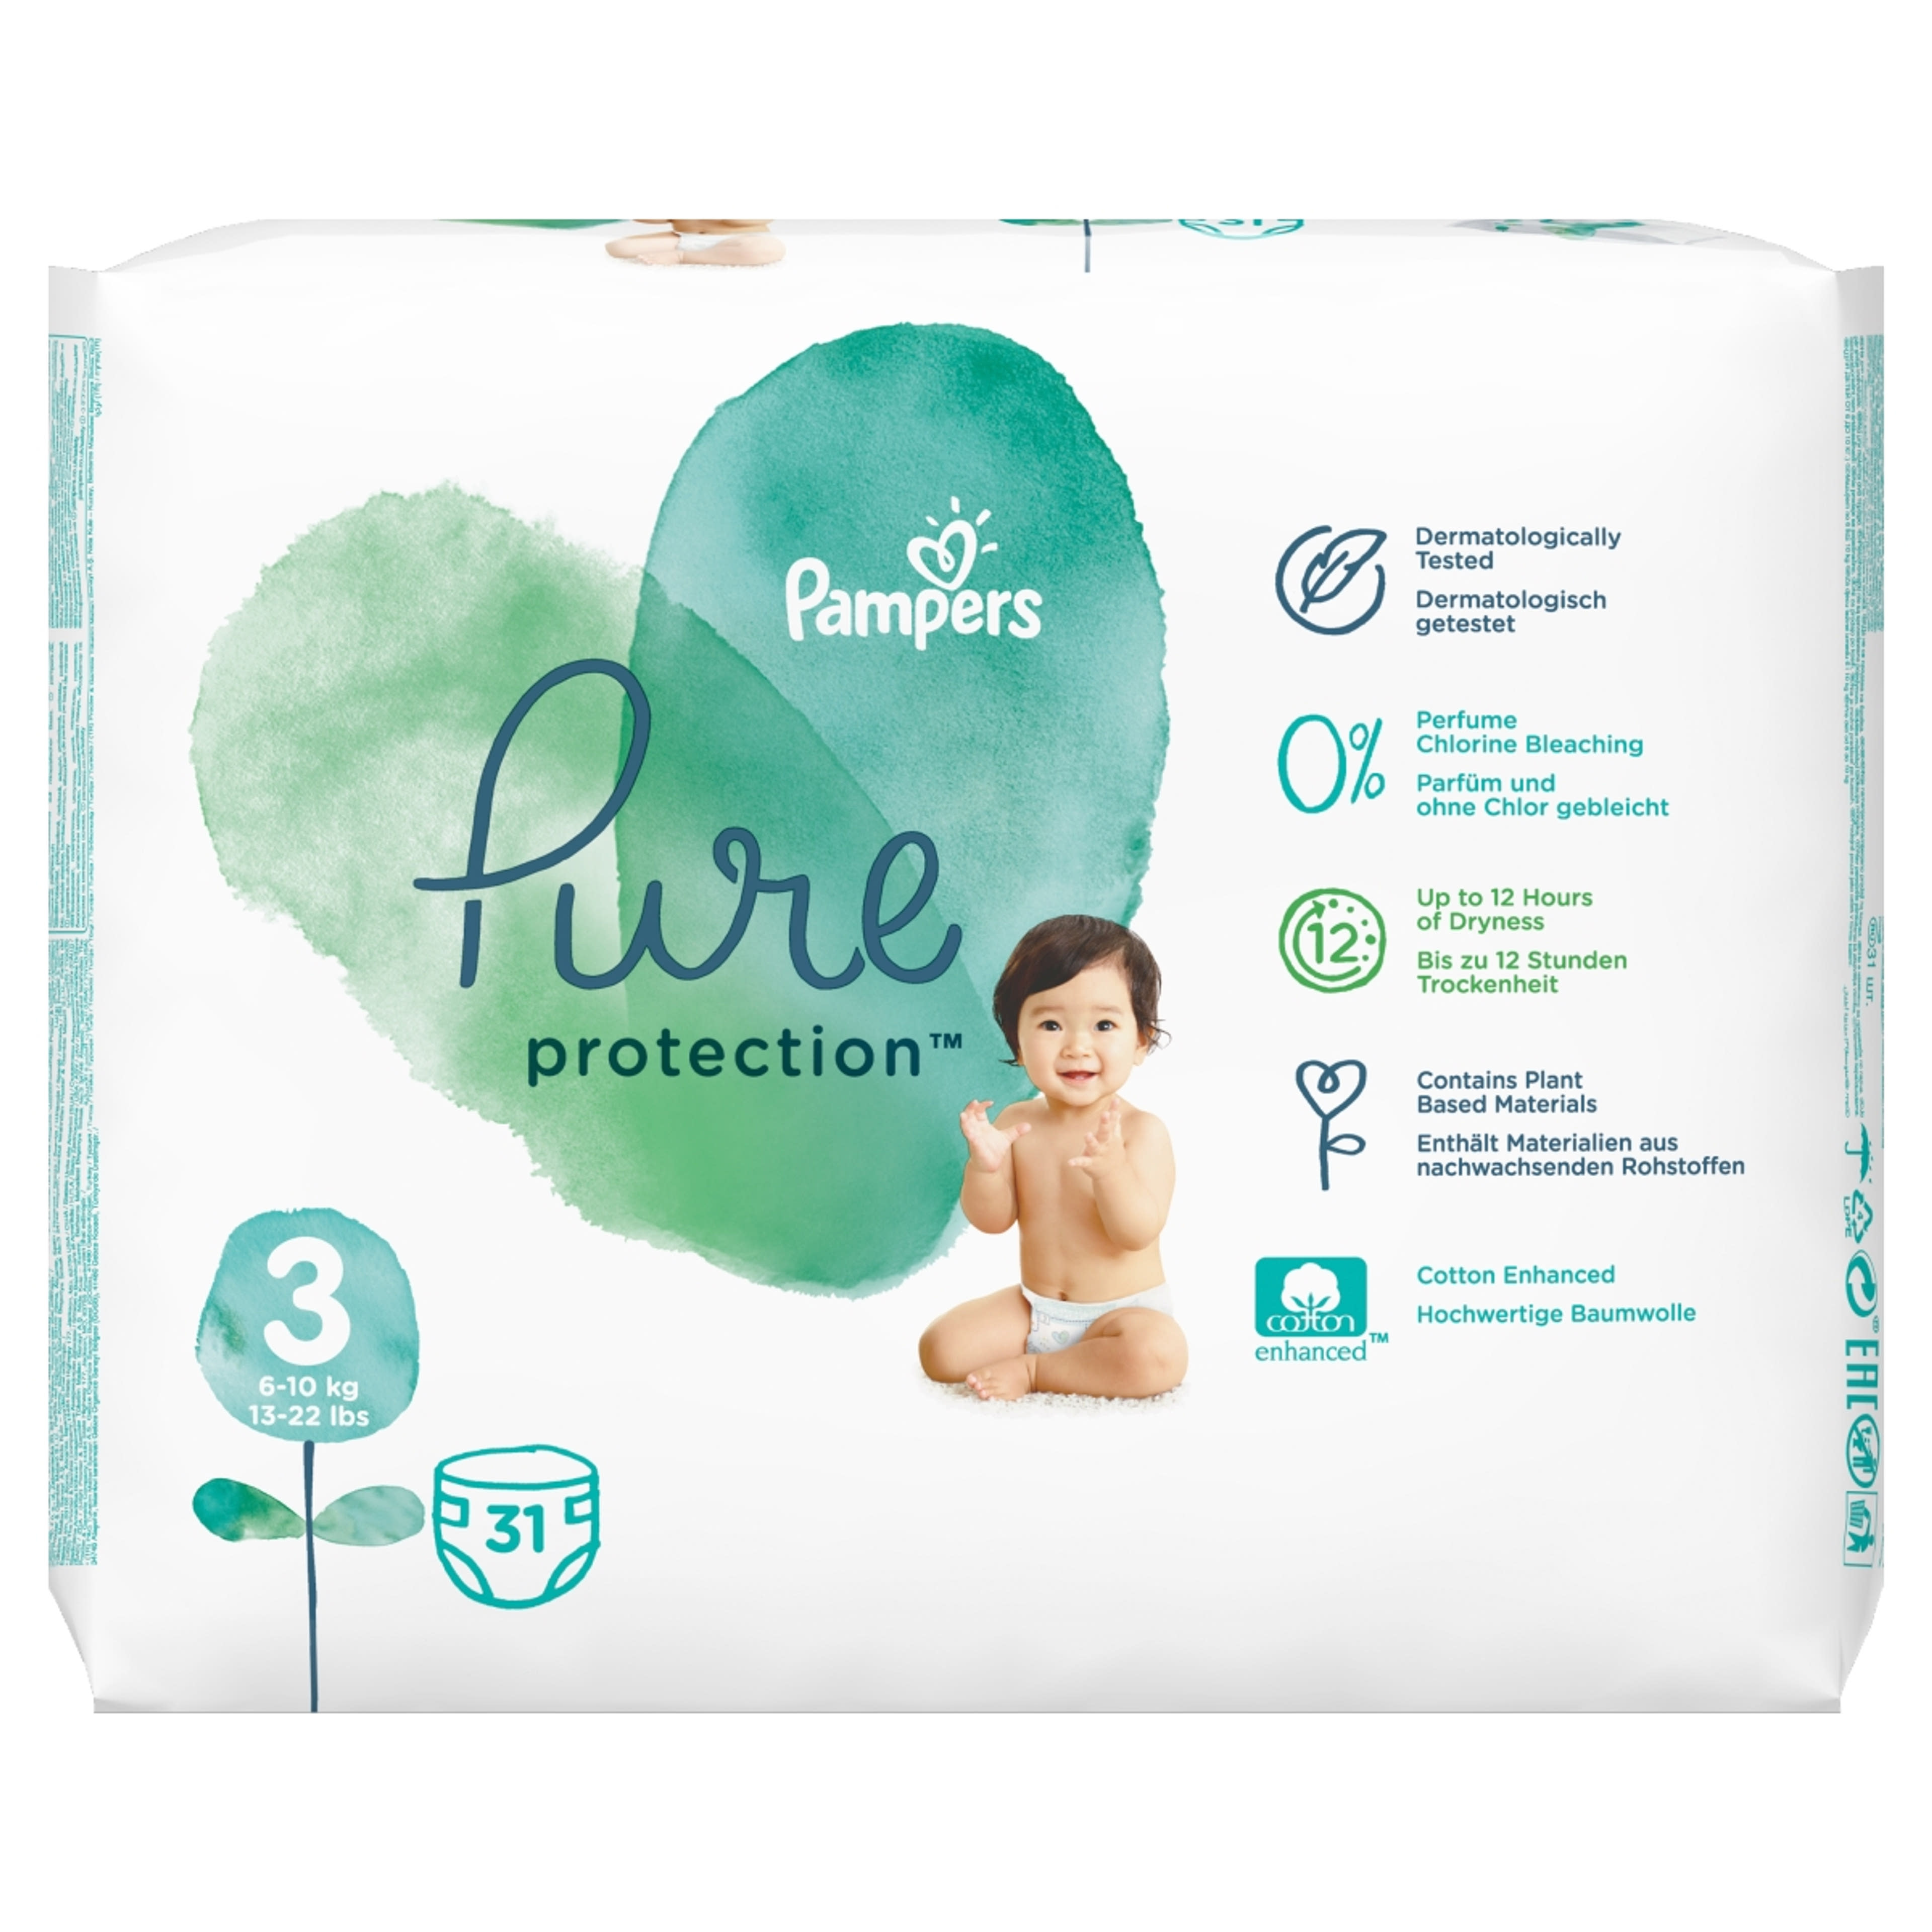 Pampers Pure ProtectionPelenka 3-as 6-10kg - 31 db